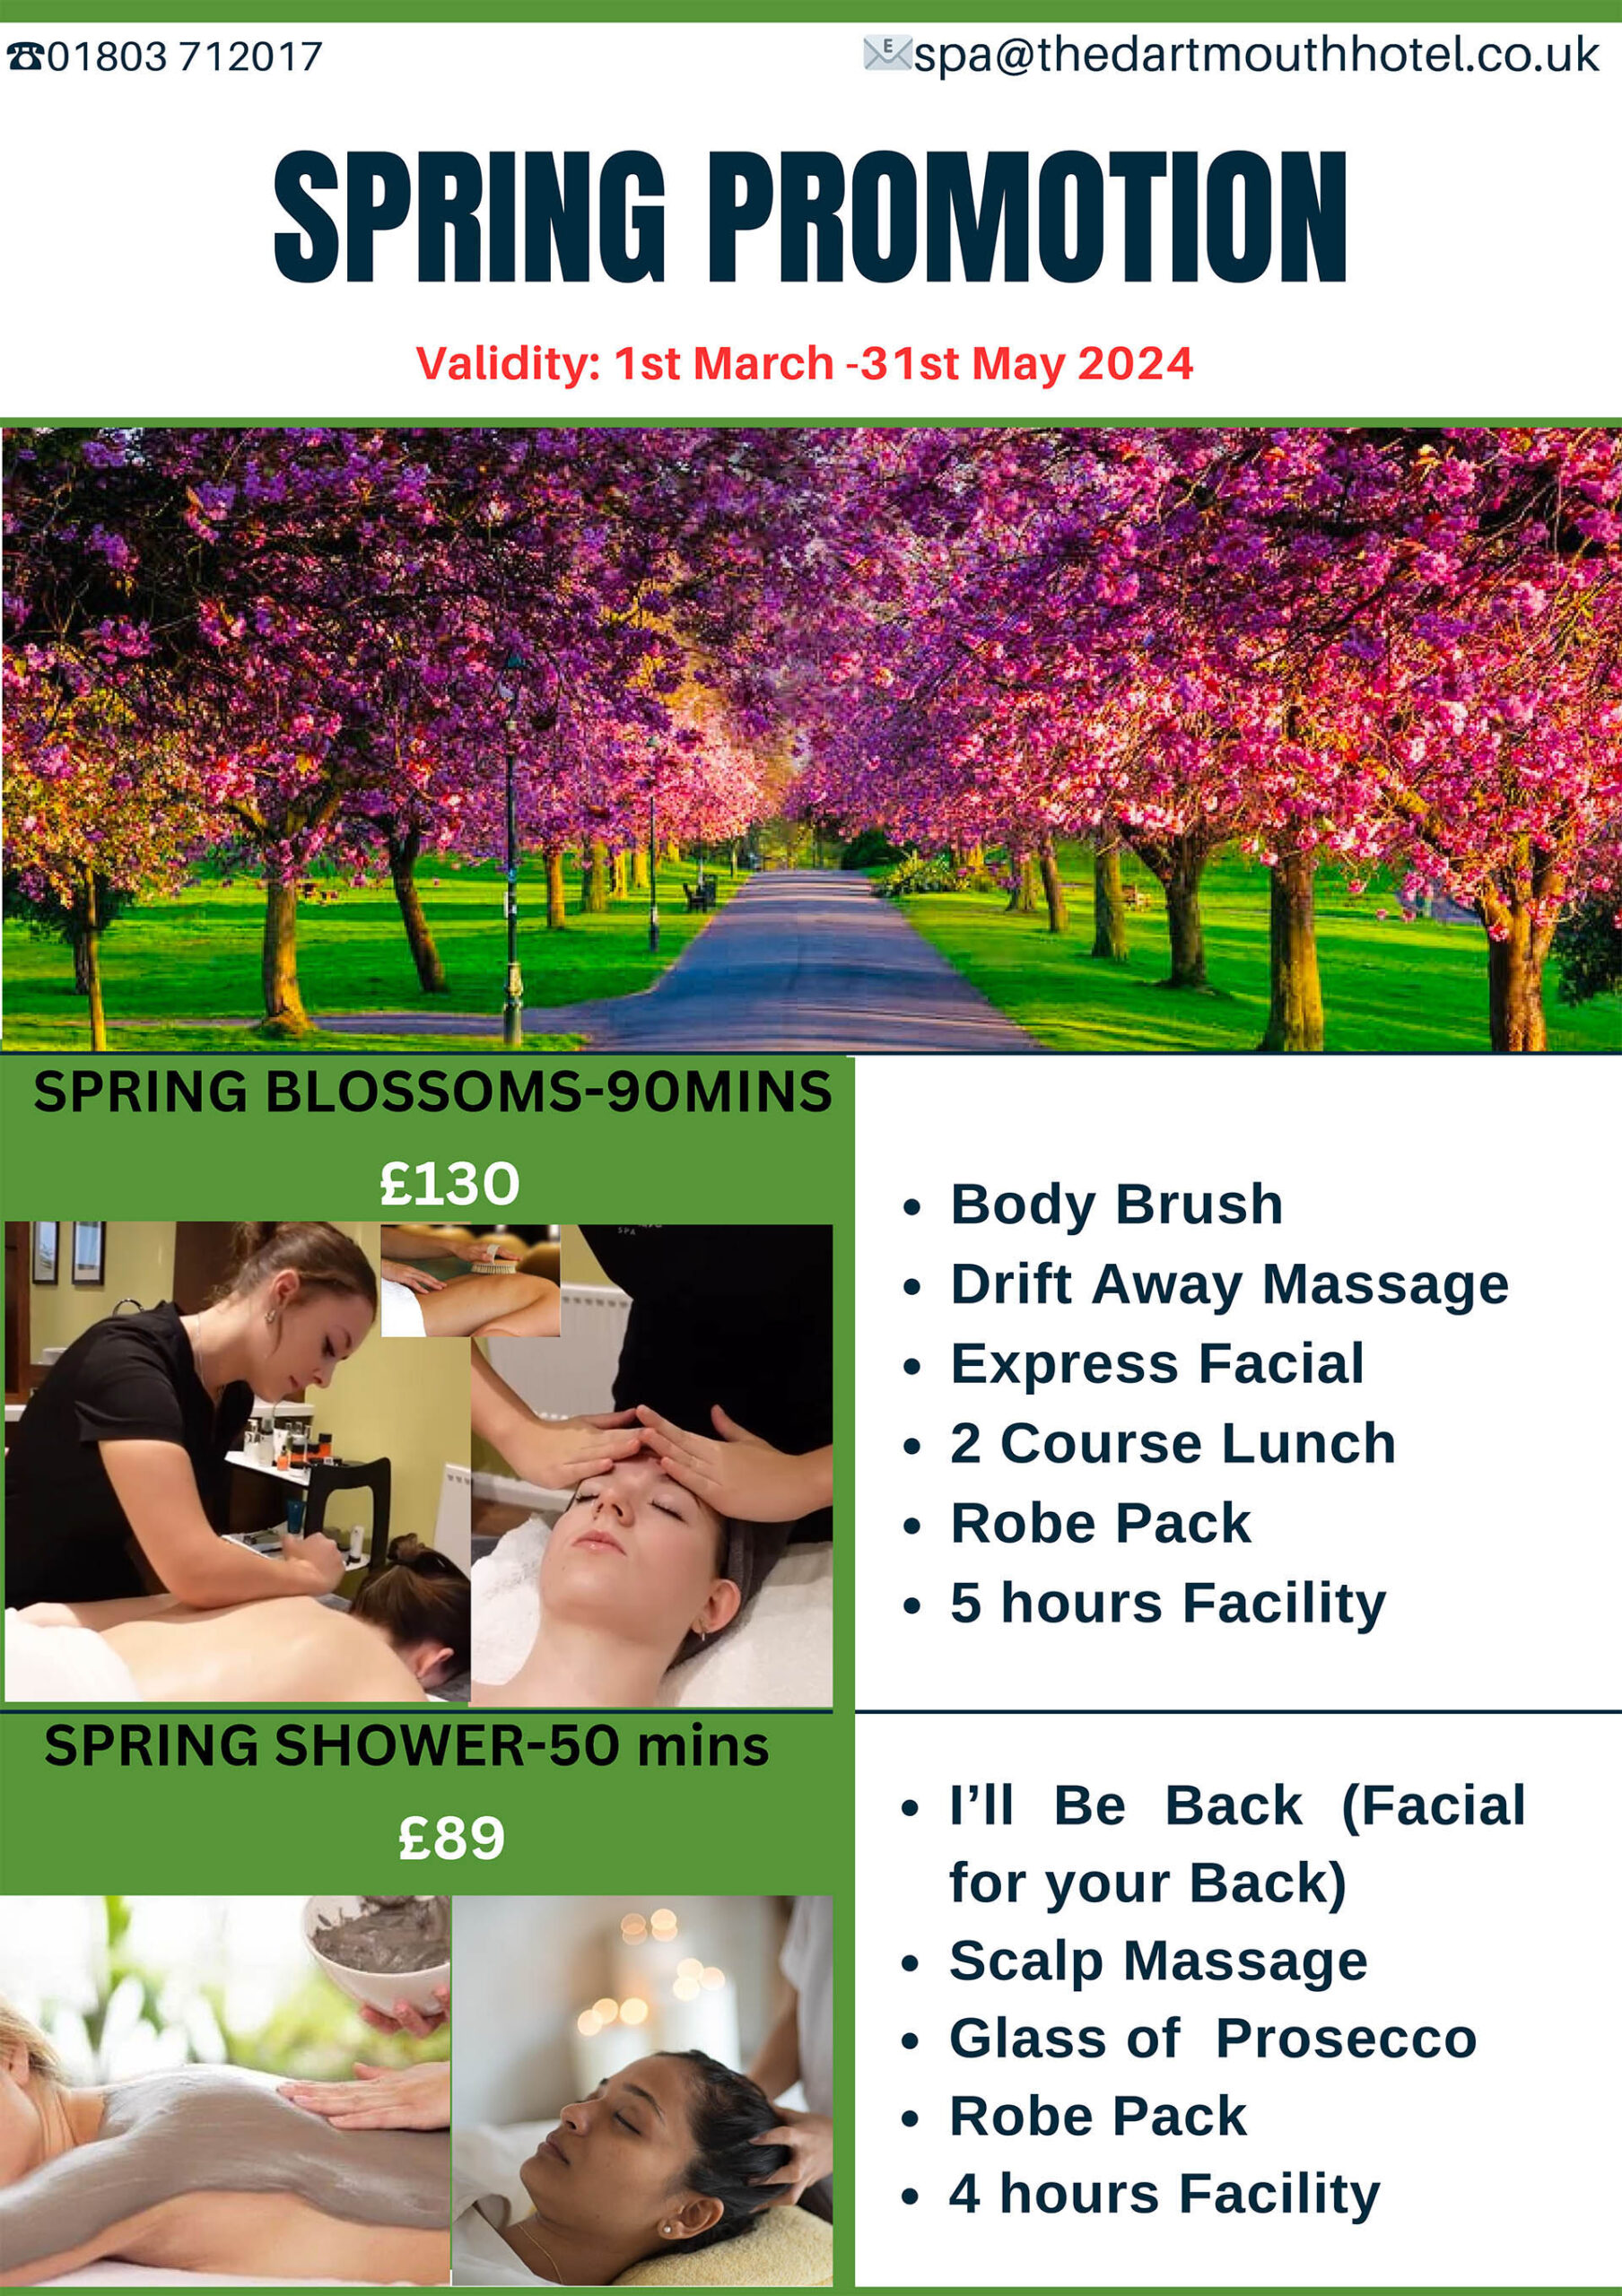 Spring 2024 Spa Offers from The Dartmouth Hotel Golf & Spa